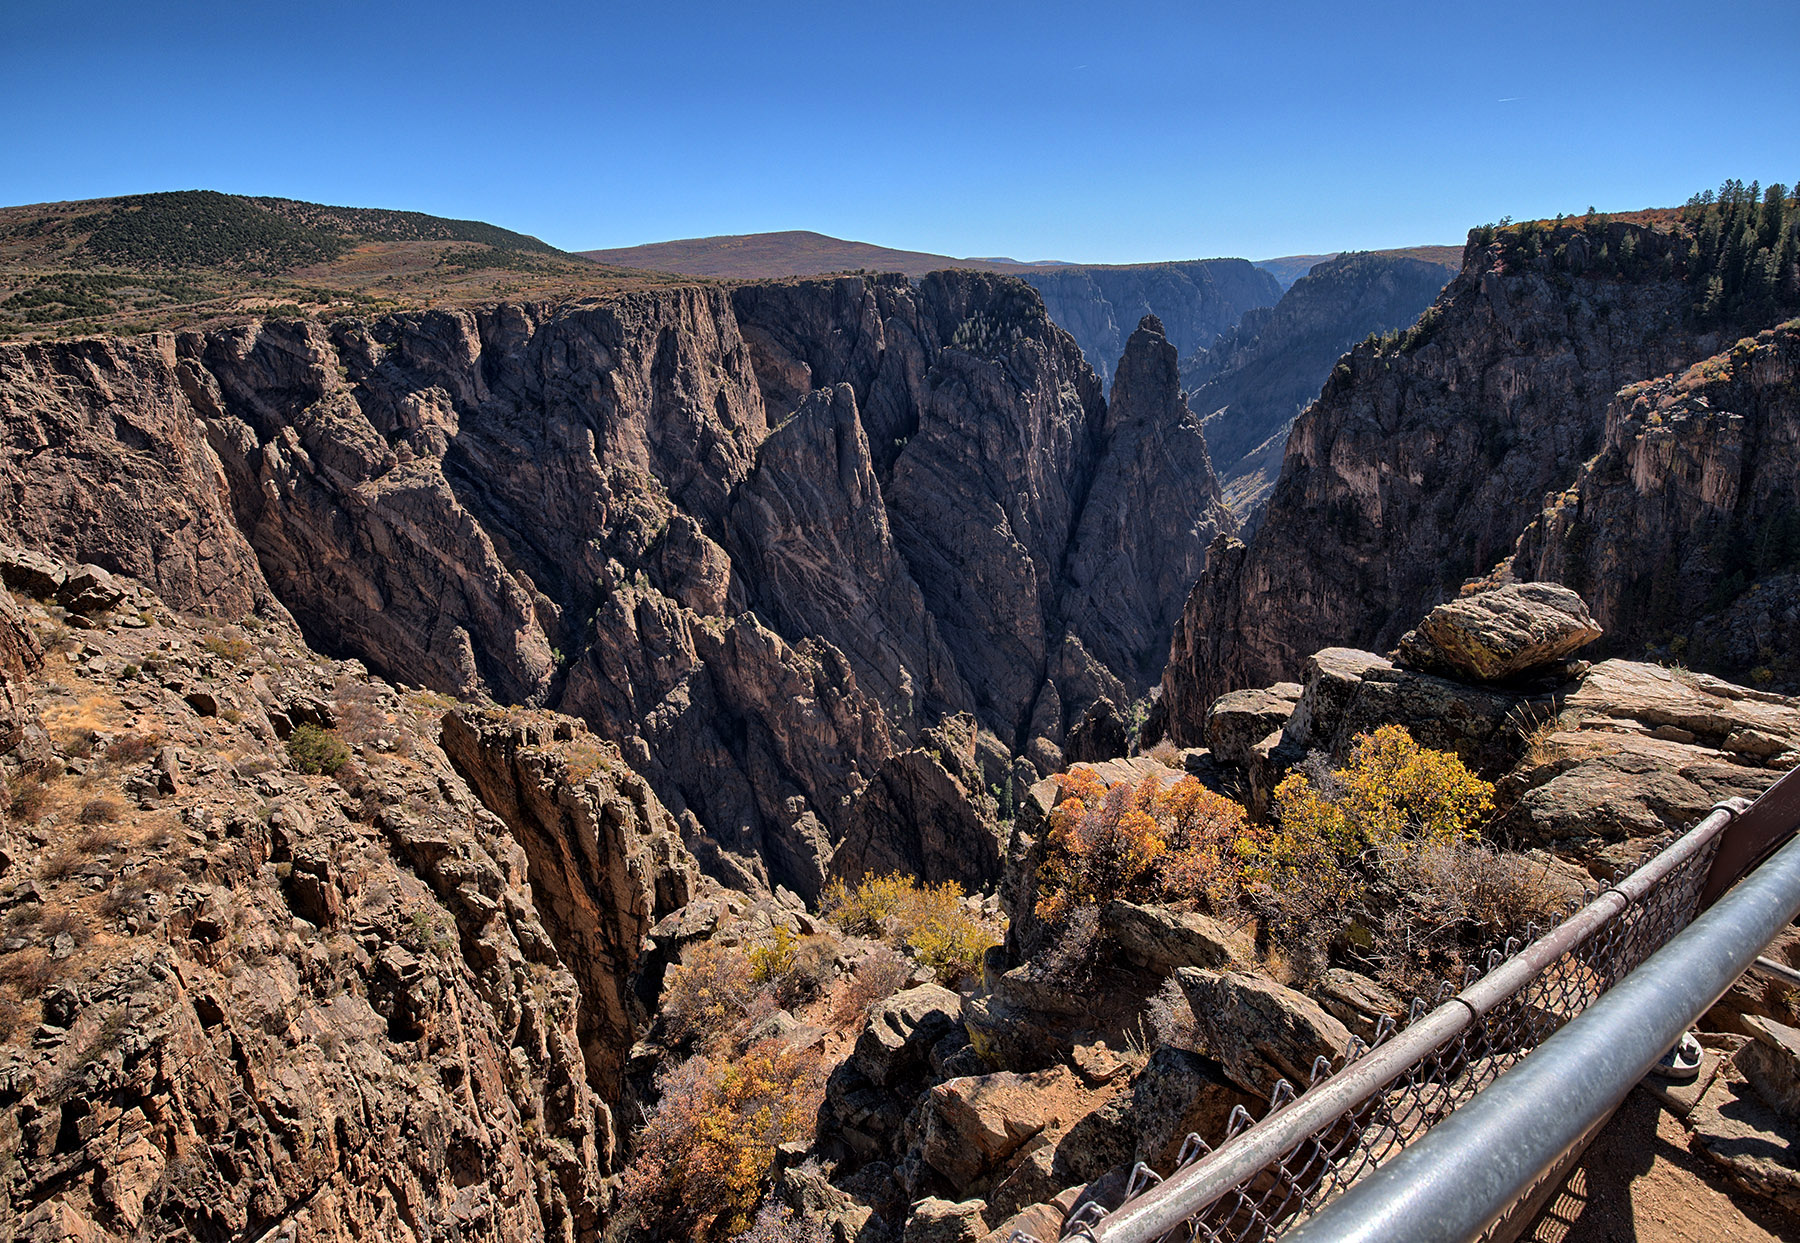 Black Canyon of the Gunnison at Cross Fissures View.